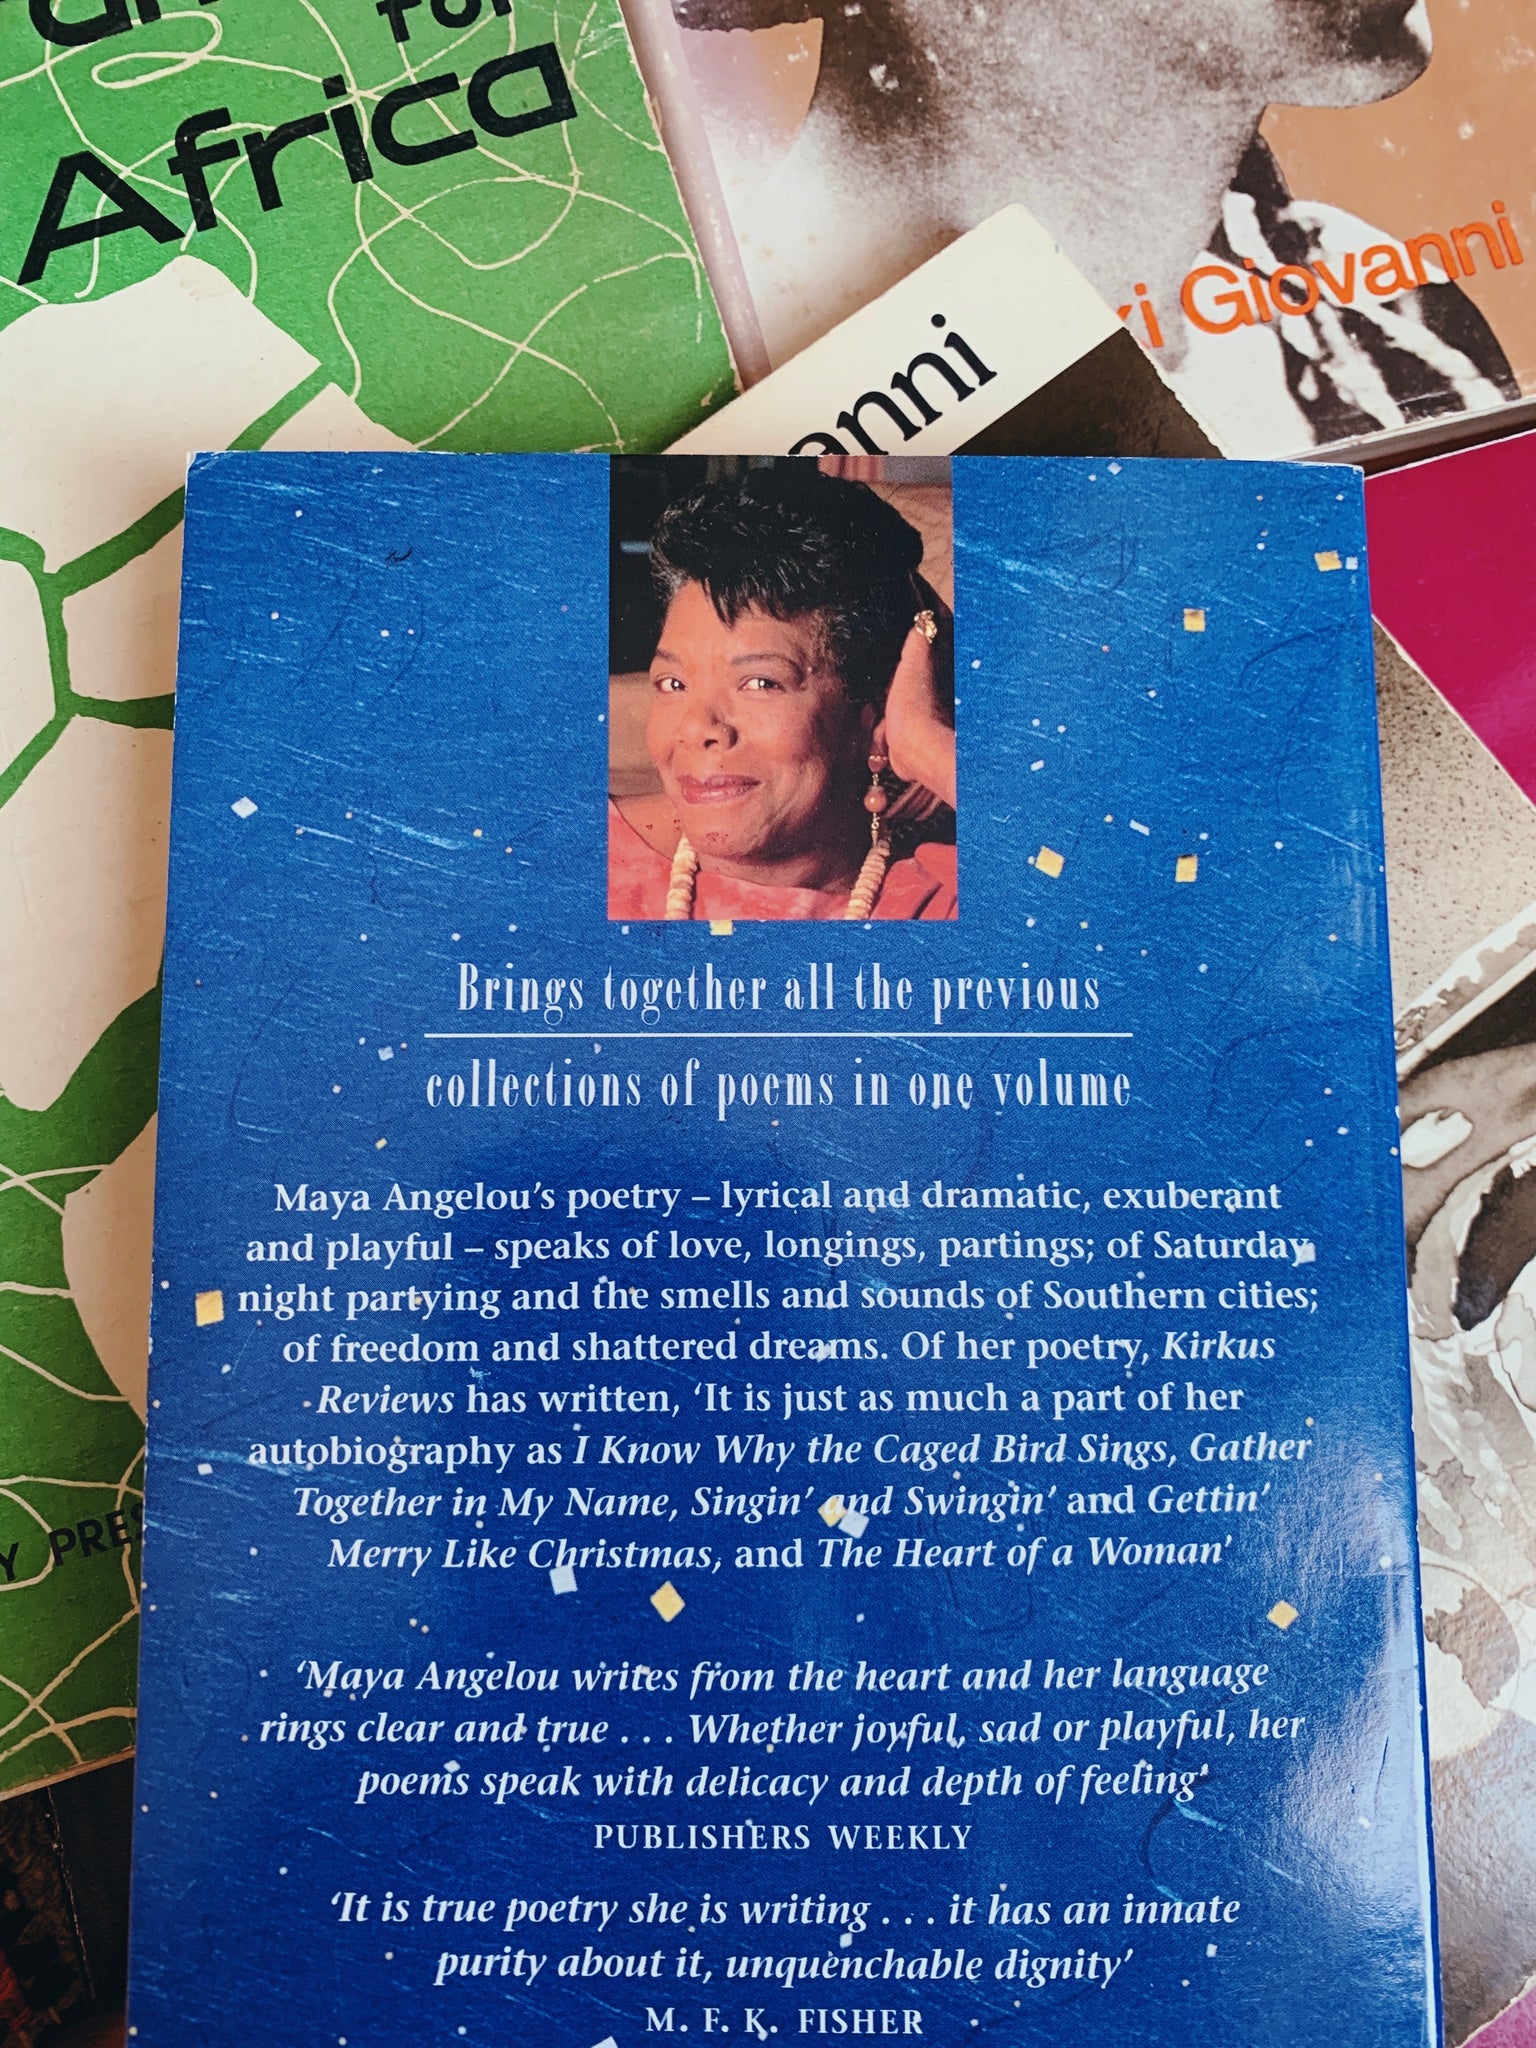 Vintage Softcover "The Complete Collected Poems of Maya Angelou” (1995)